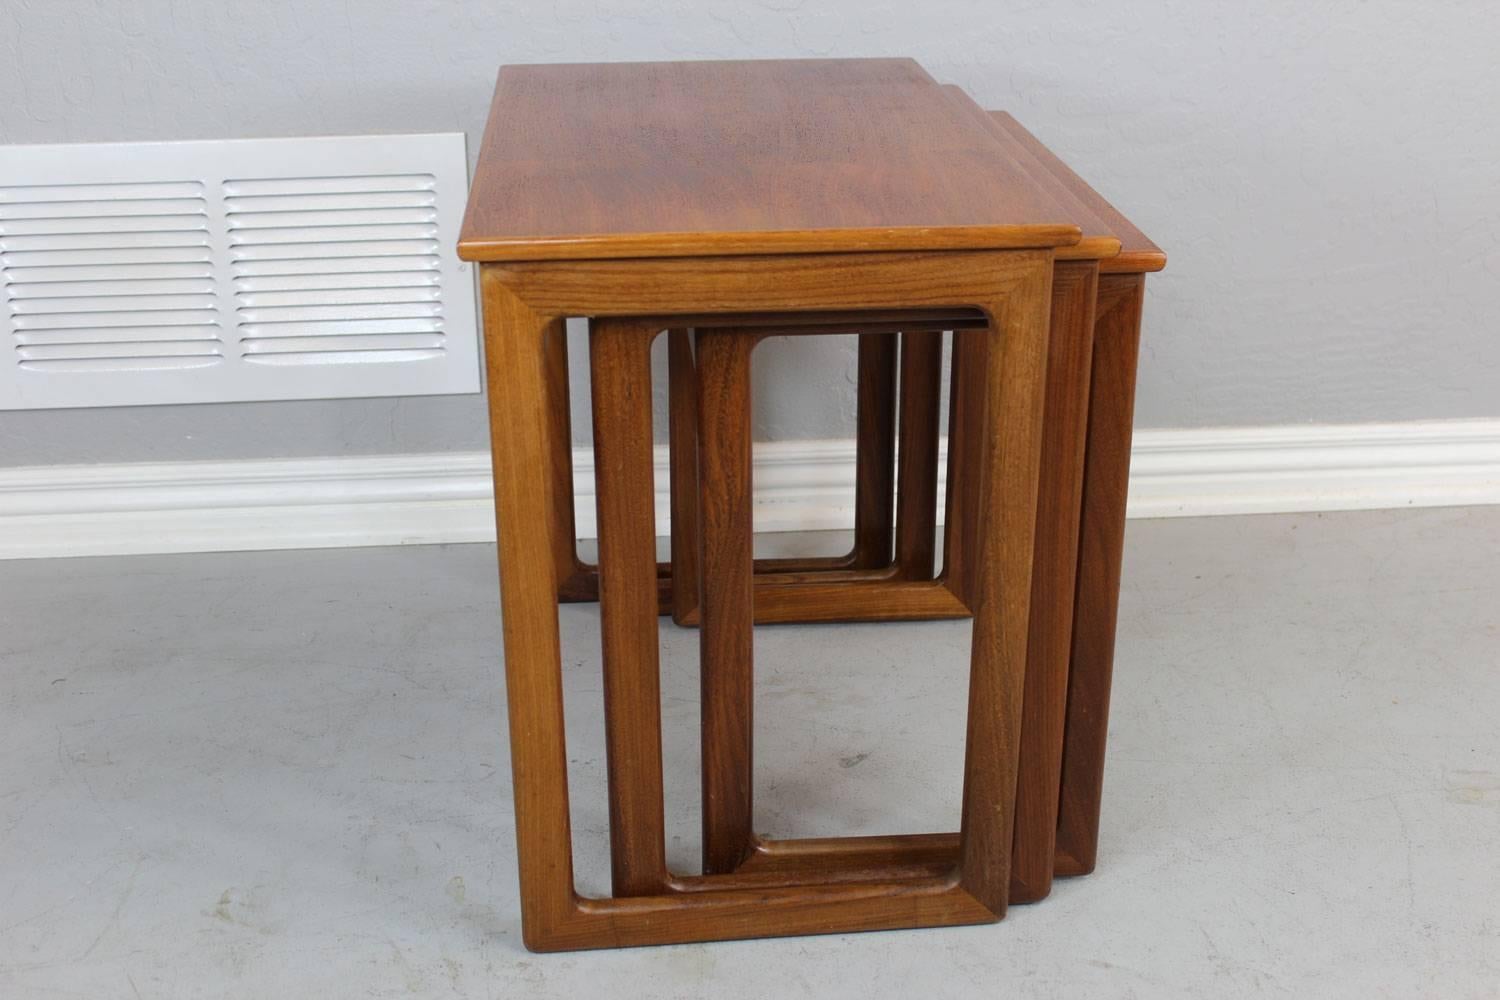 Teak nesting tables designed by A. Kildeberg, circa 1960. 

Dimensions of biggest table are outlined below.